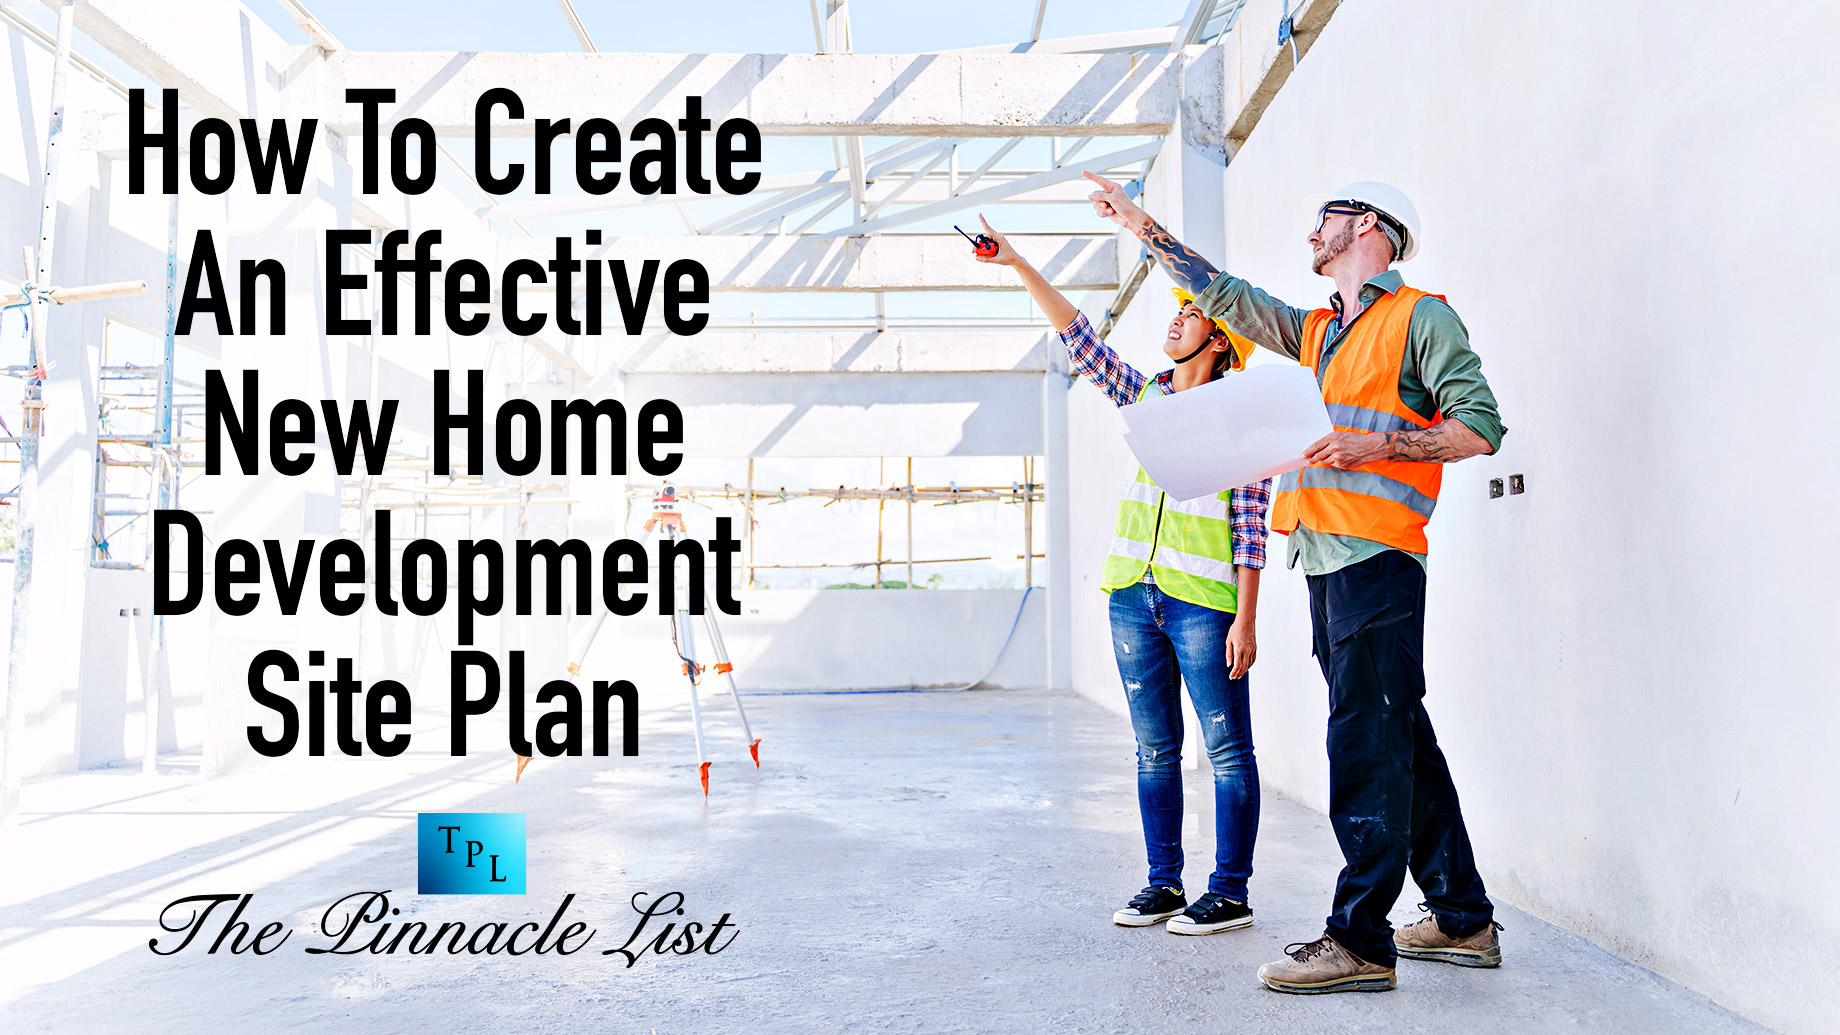 How To Create An Effective New Home Development Site Plan